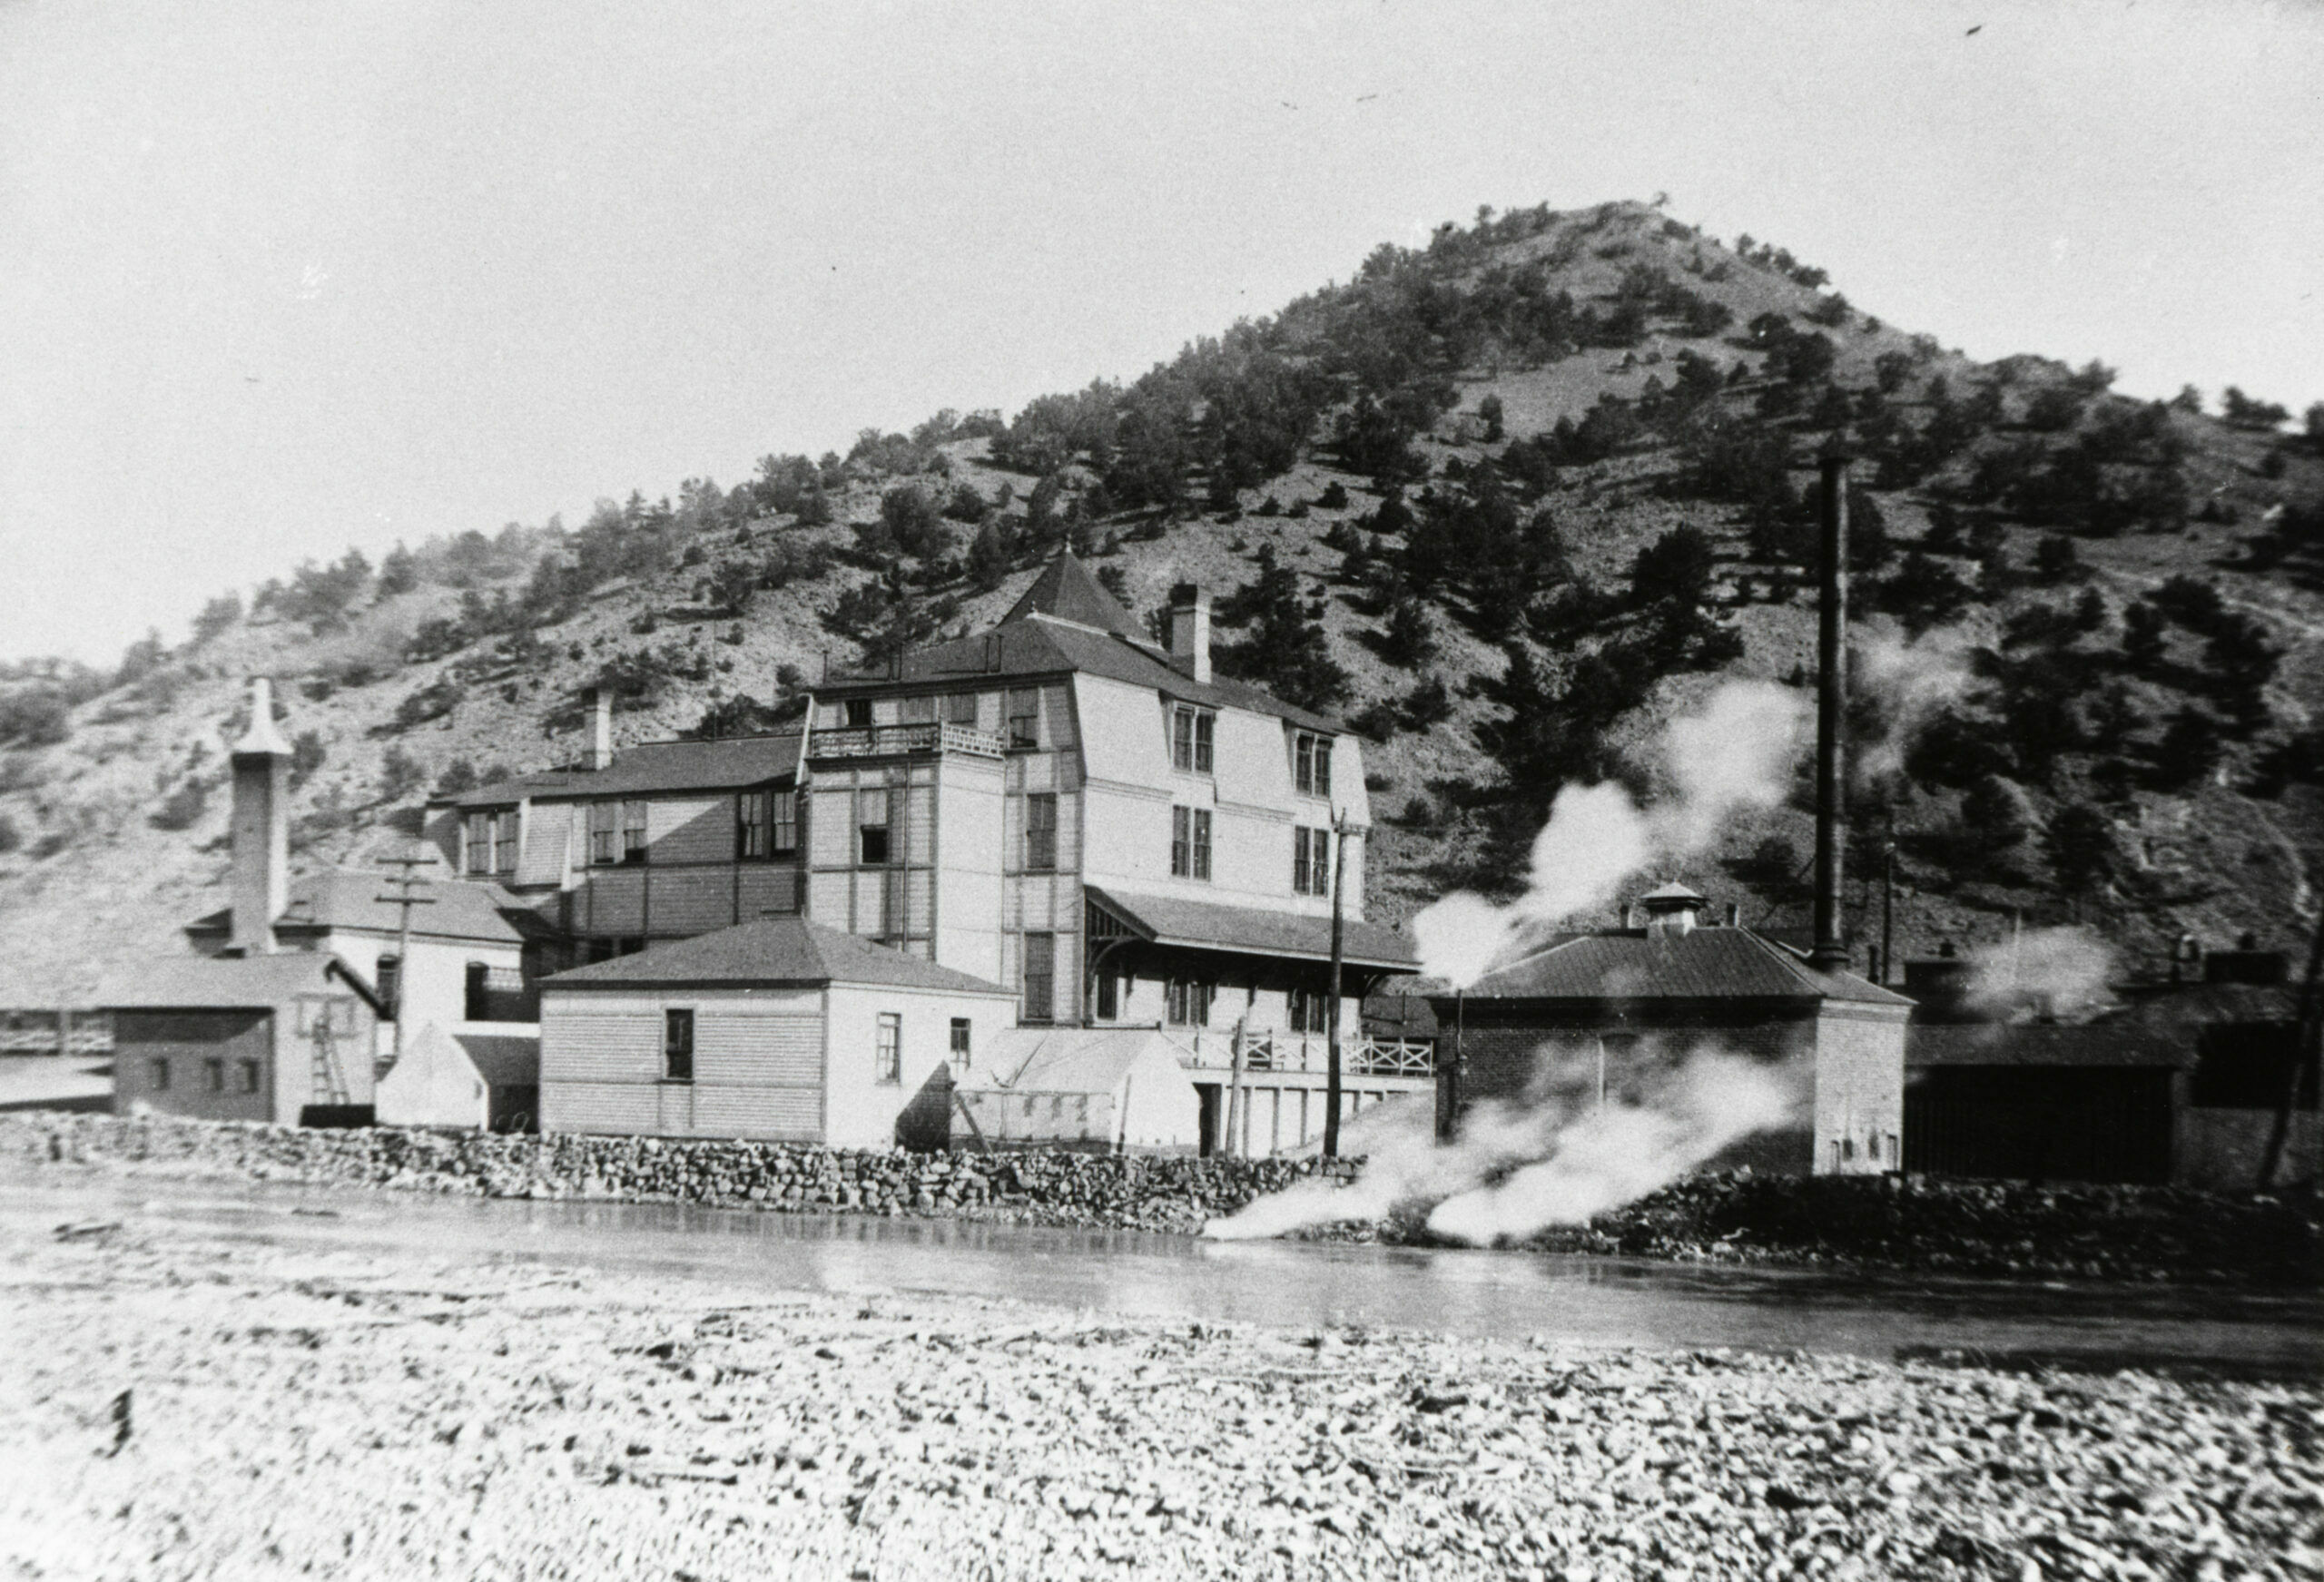 The rear of the Hotel Monte Christo is seen in this rare view, recorded on a glass negative before 1889, during the period before the standard-gauge reached Salida. Tents were put up for additional staff on either side of the bunkhouse. The D&RG pumphouse is to the right of the hotel. Beyond the pumphouse coal shed, the cabooses are visible. A protective rock wall was built to prevent erosion of the property by high water from the Arkansas River. Tenderfoot Hill, still speckled with pinon and cedar trees, was beyond the hotel and railroad yards.  (2)